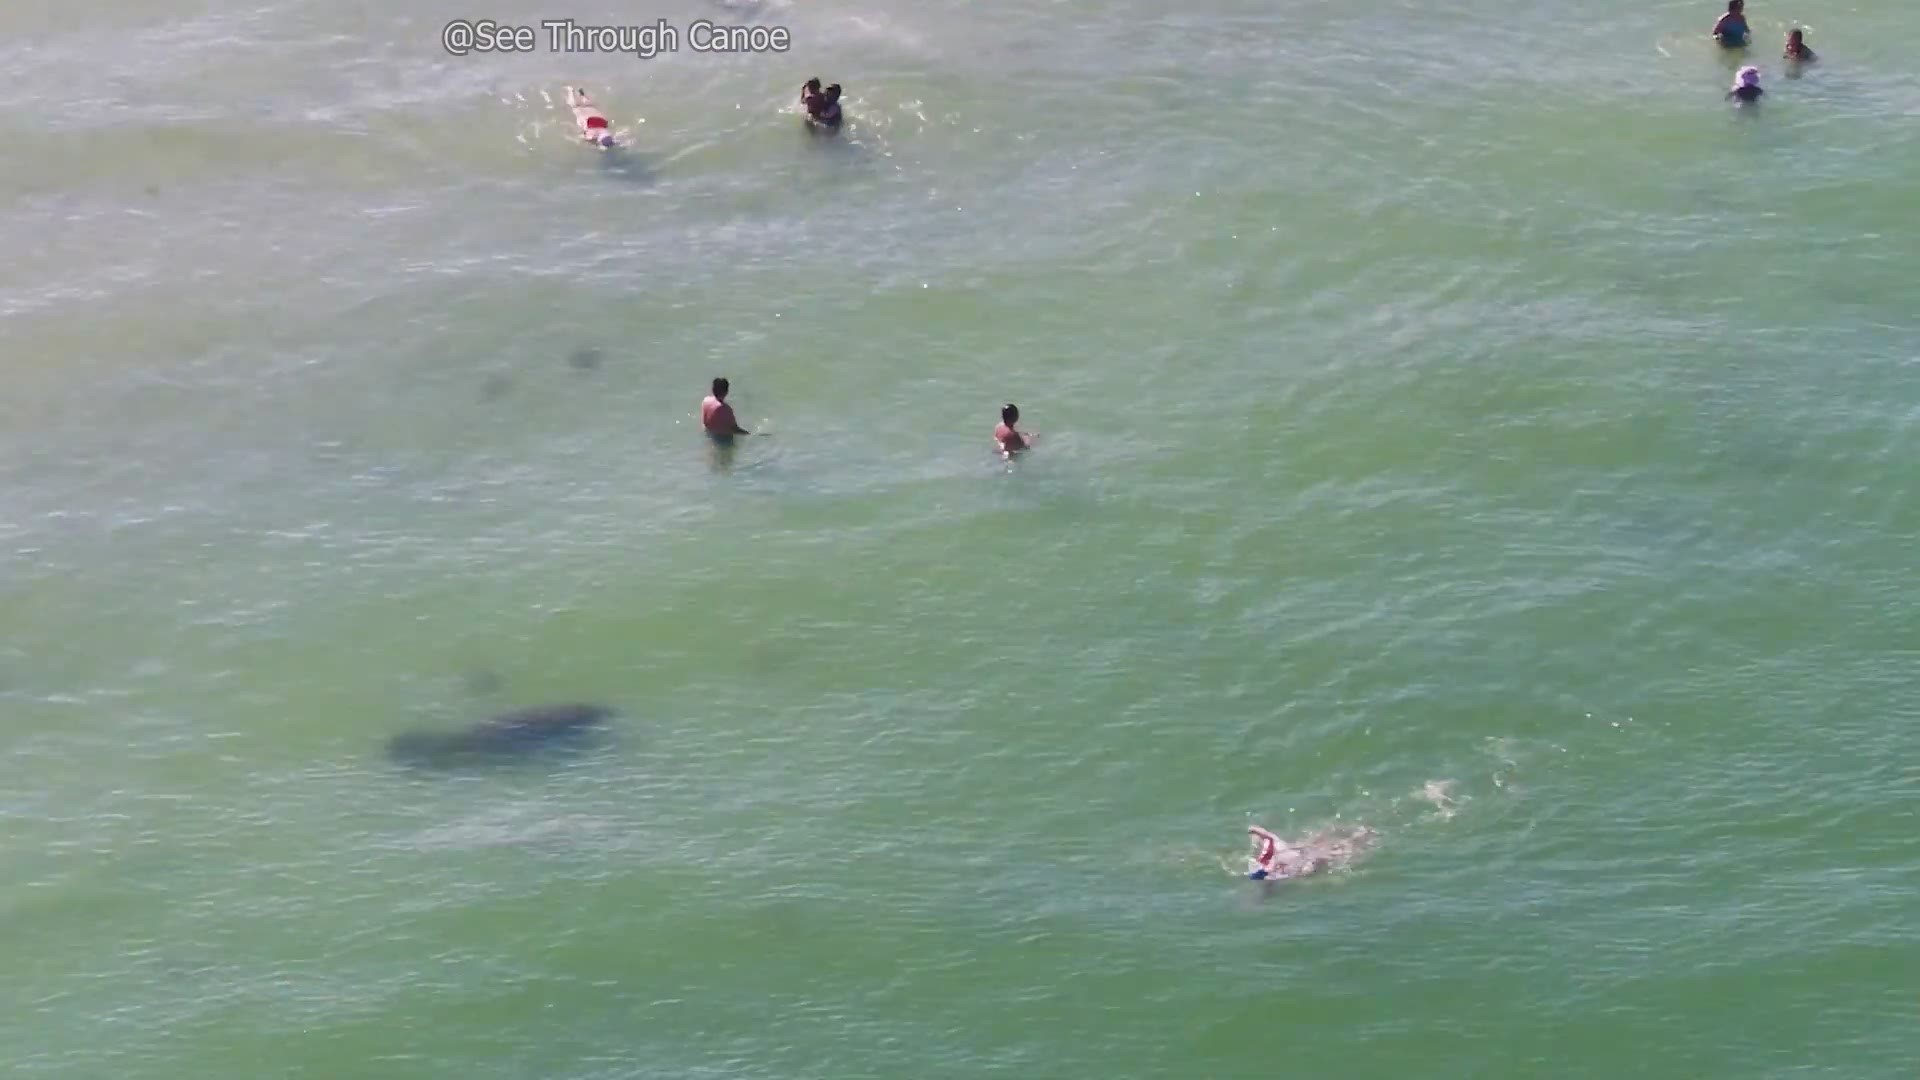 The sea cow went largely unnoticed by beachgoers as it swam among them.